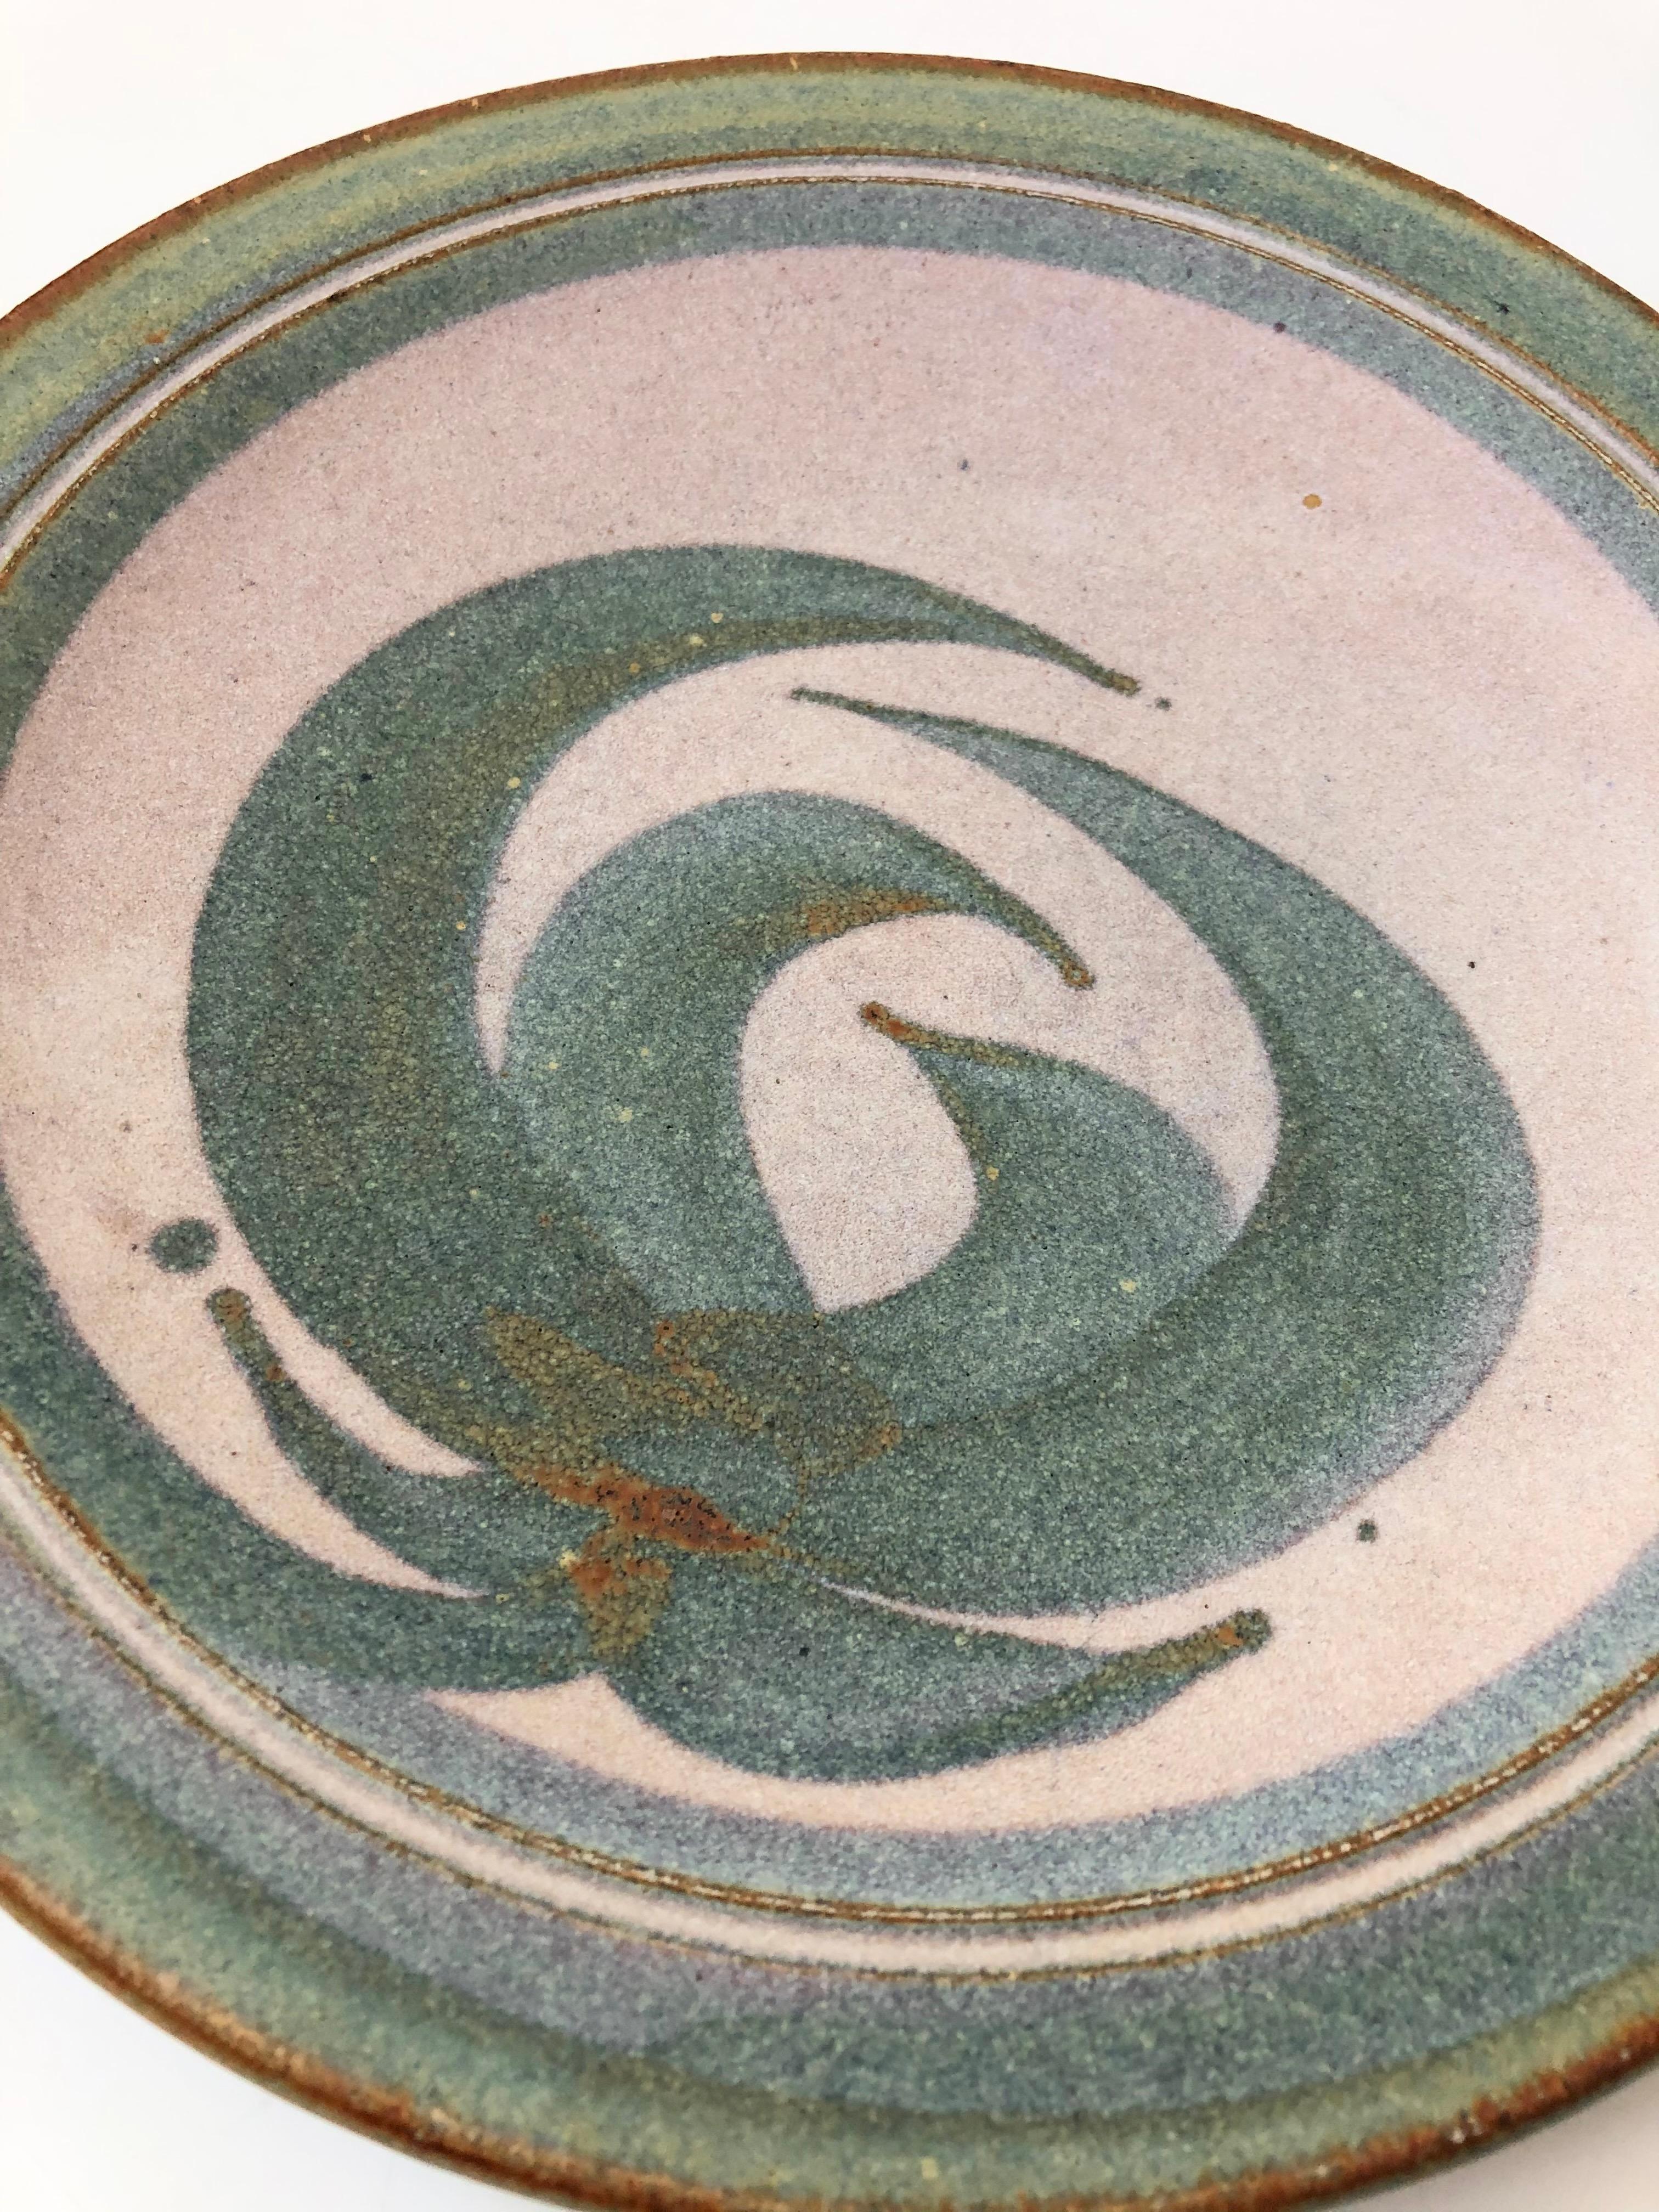 1980s Studio Pottery Plate In Good Condition For Sale In Vallejo, CA